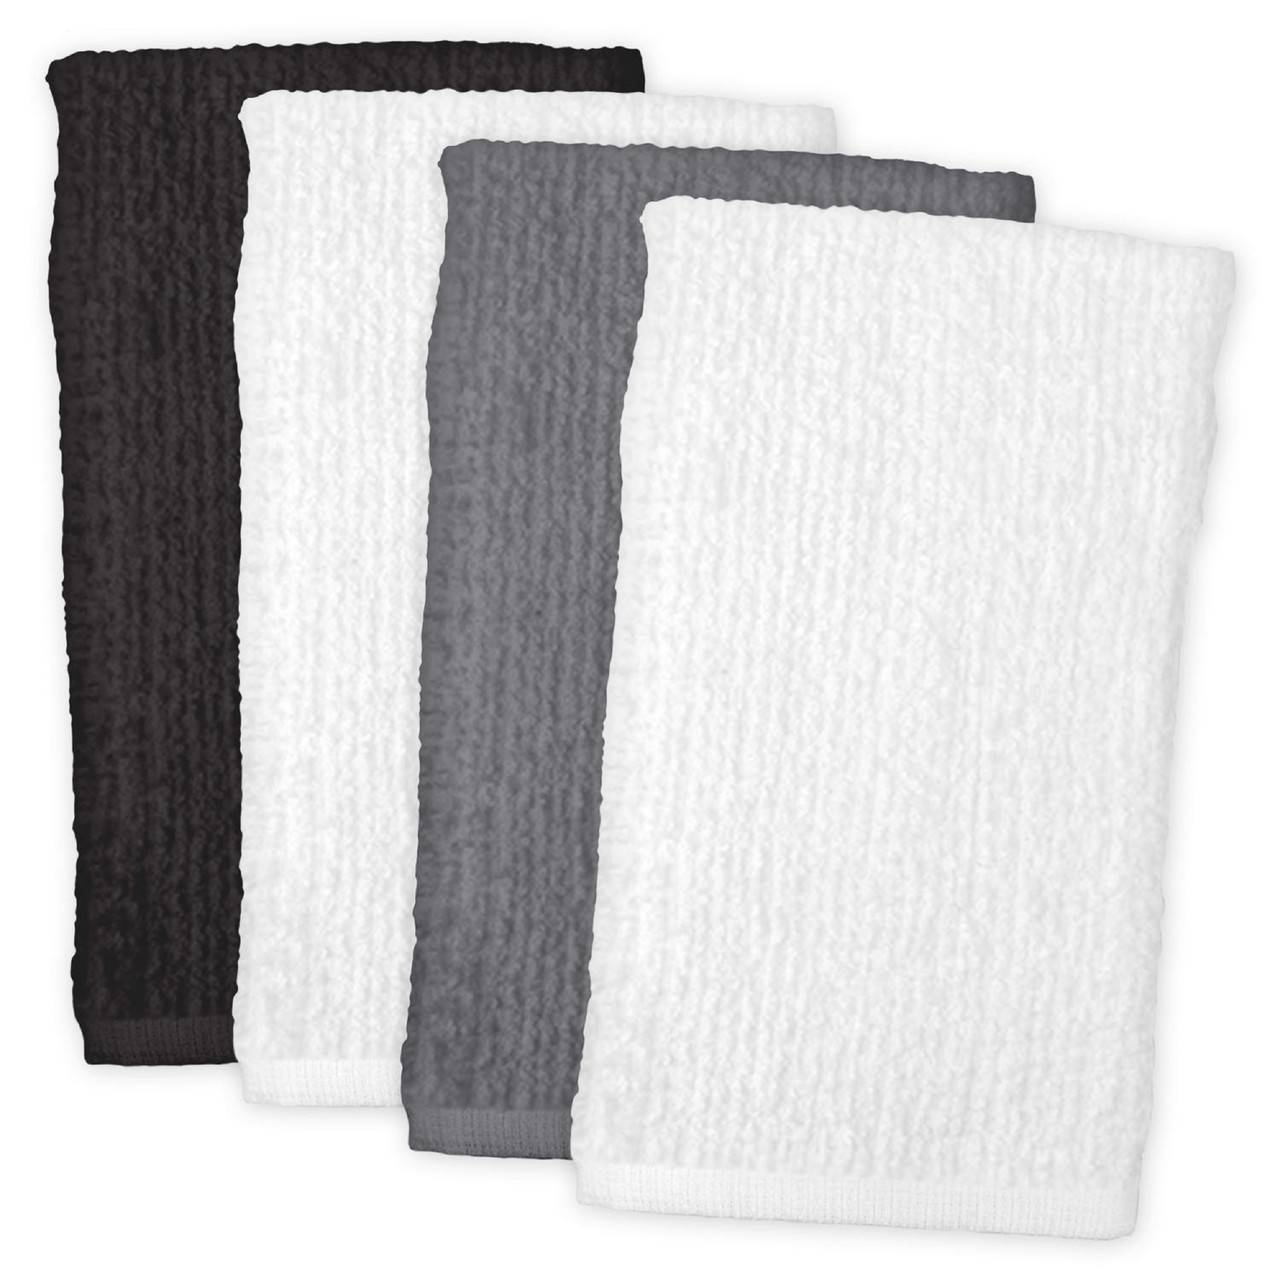 Set of 4 White & Black Solid Bar Mop Cleaning Dish Towels 18 x 28